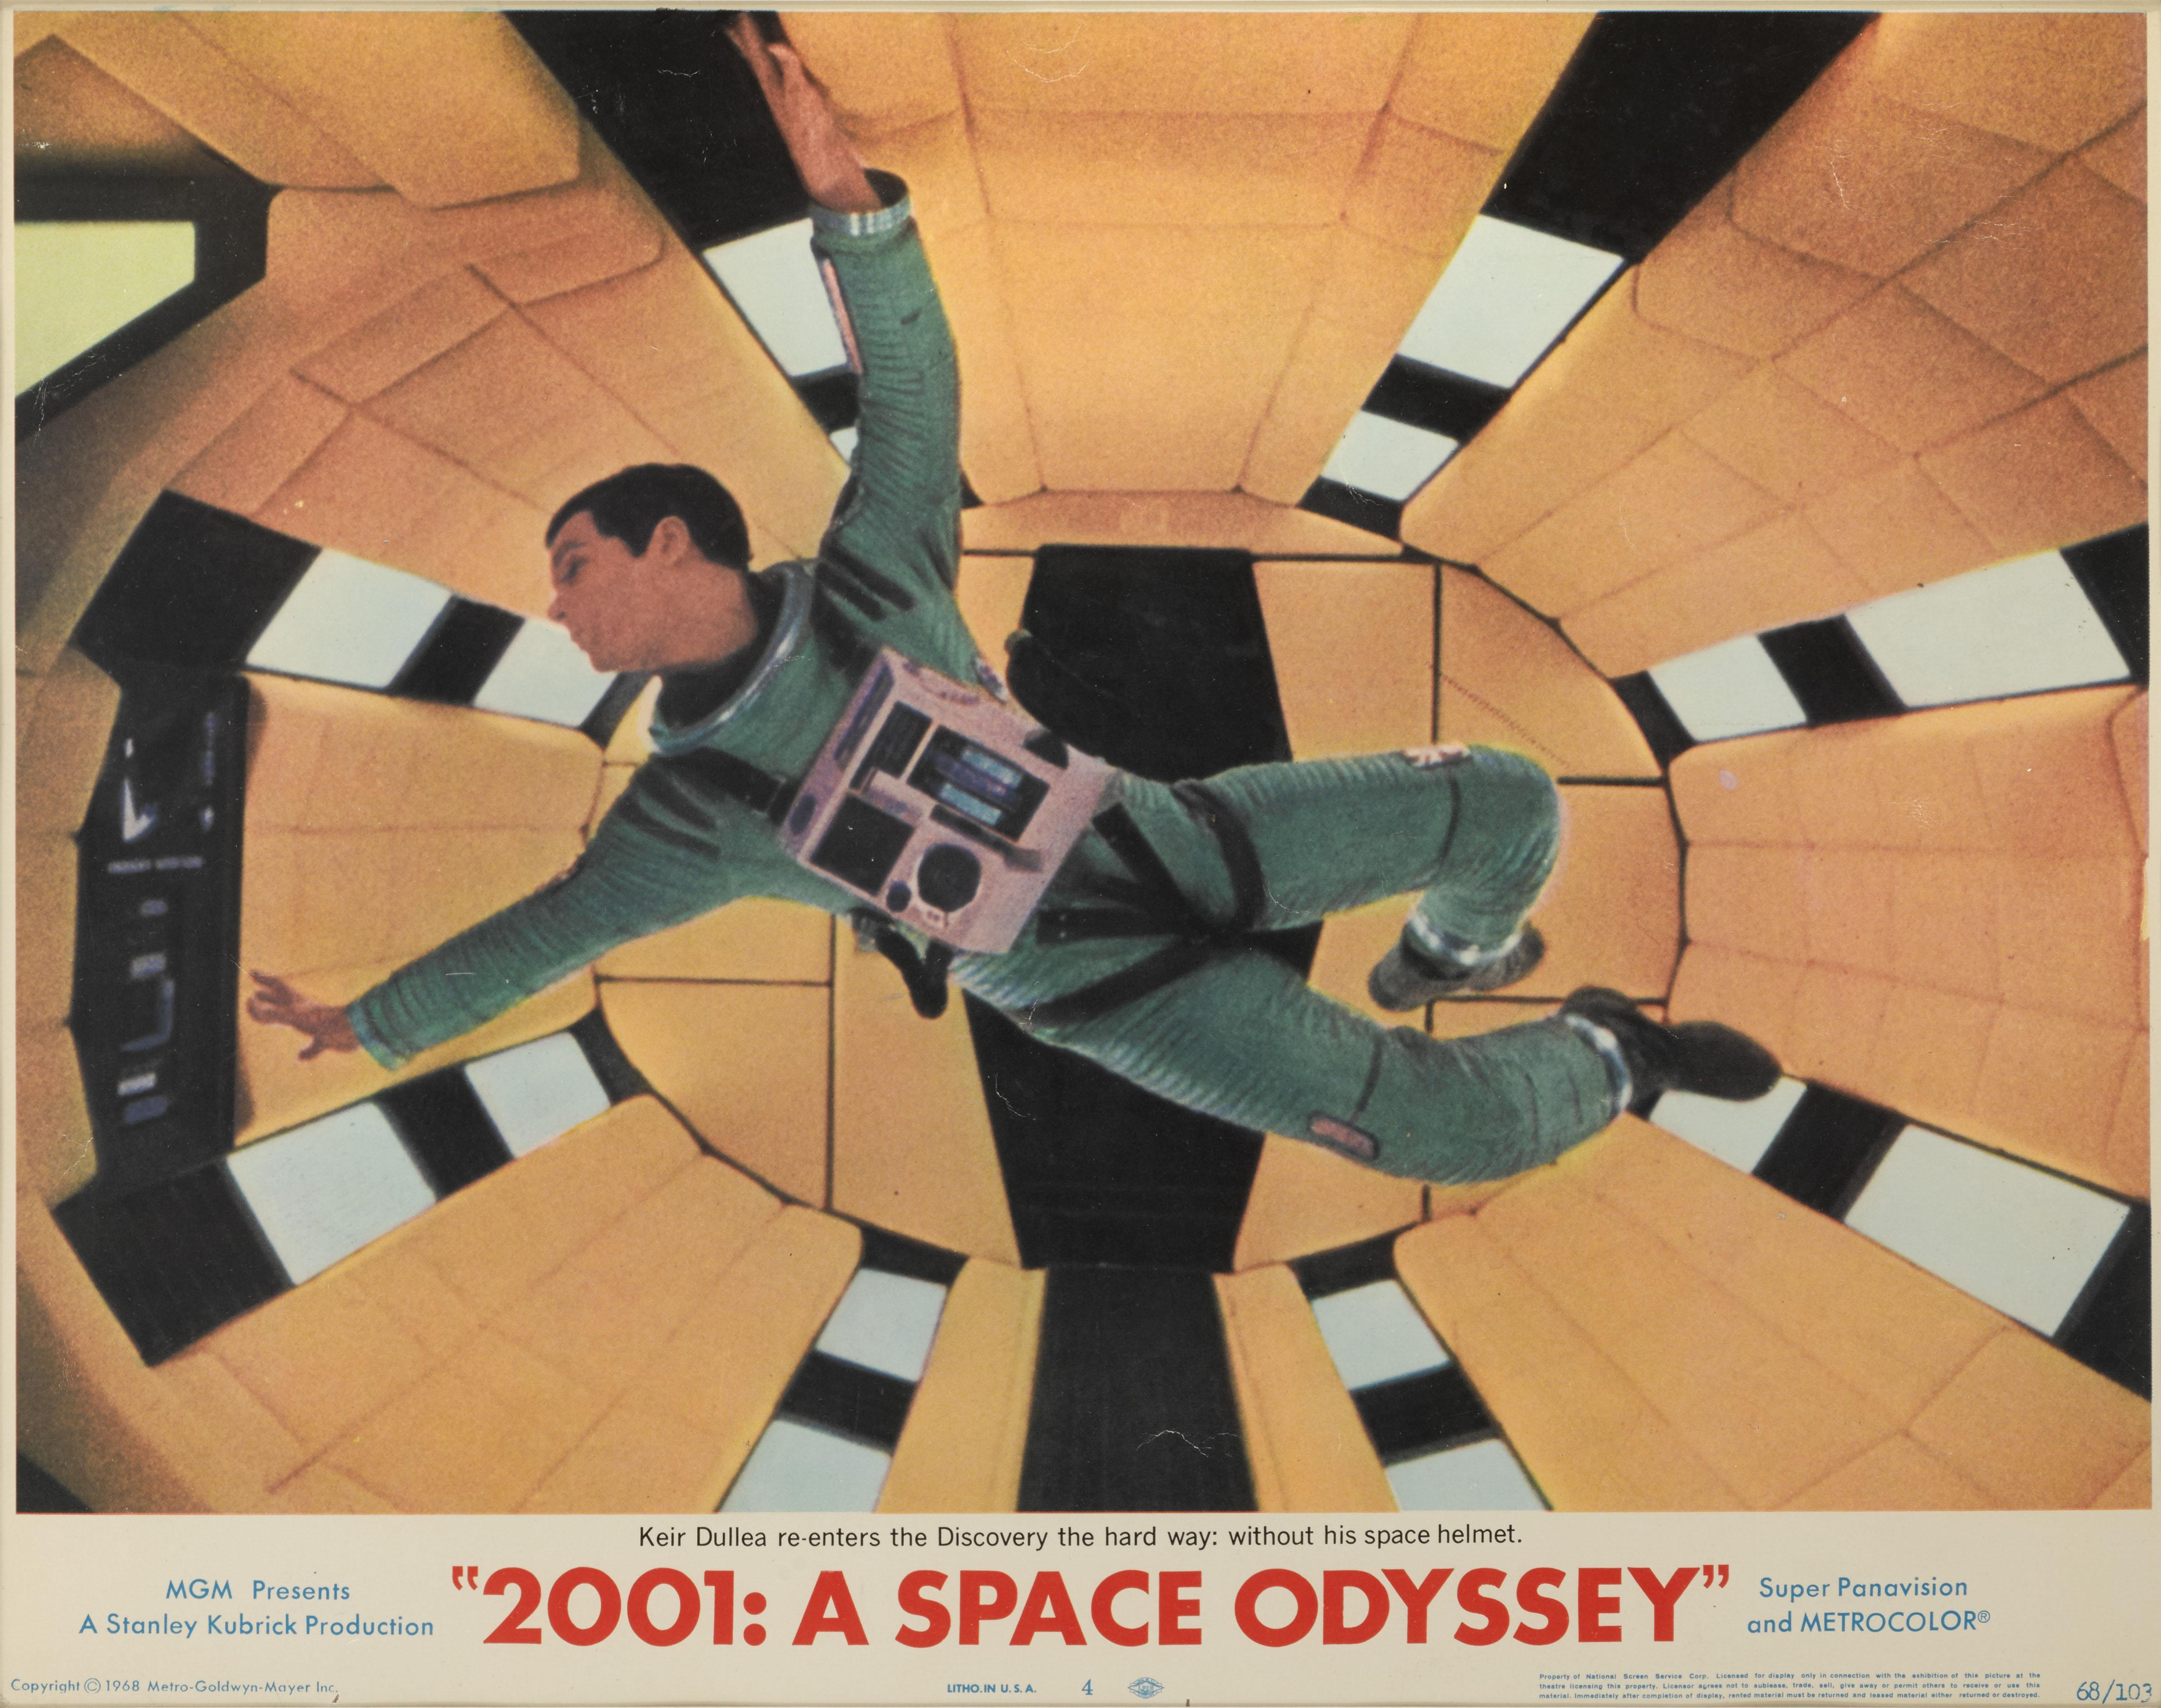 Original US Lobby card number 4 for Stanley Kubrick's 2001: A Space Odyssey.
This lobby card is conservation framed with UV plexiglass in a Tulip wood frame with card mounts and UV plexiglass. The size given is before framing.
This piece would be